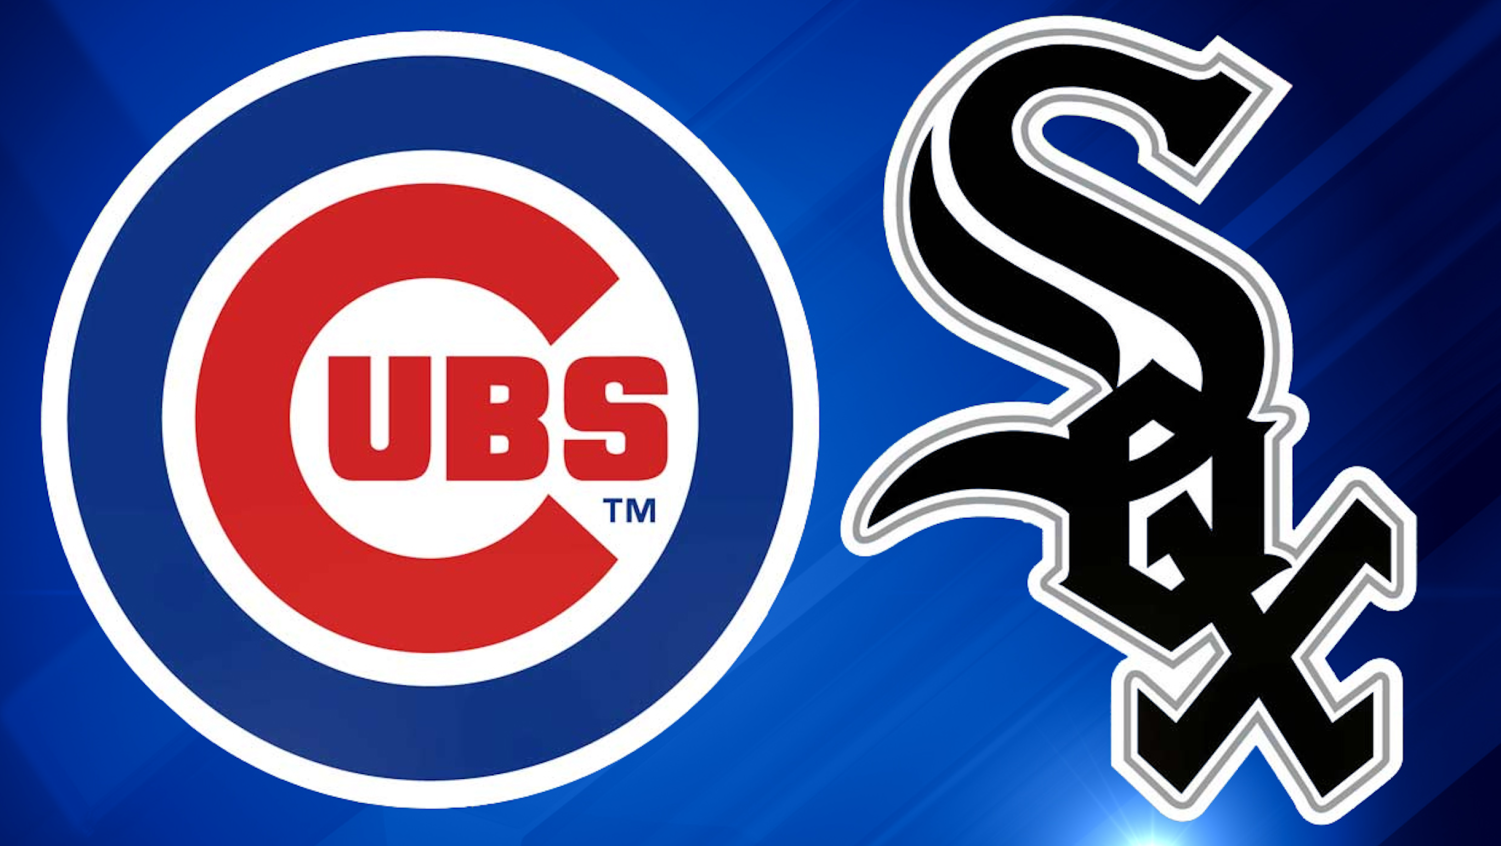 The White Sox versus the Cubs a crosstown rivalry comparison FHC Sports Report